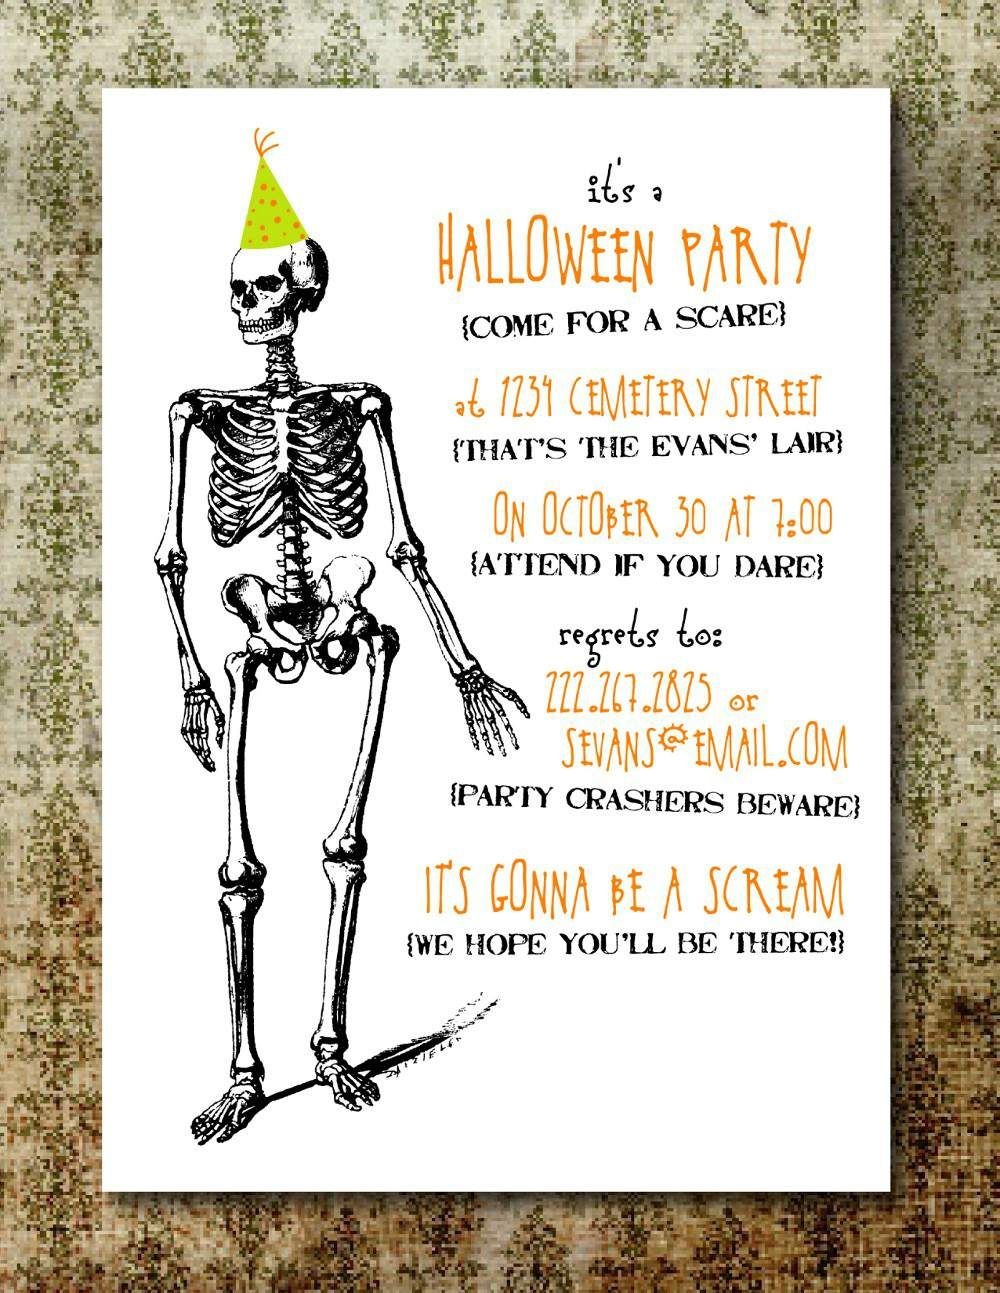 Halloween Party Invitations Free Printable … | Creepy In 2019… - Halloween Invitations Free Printable Black And White